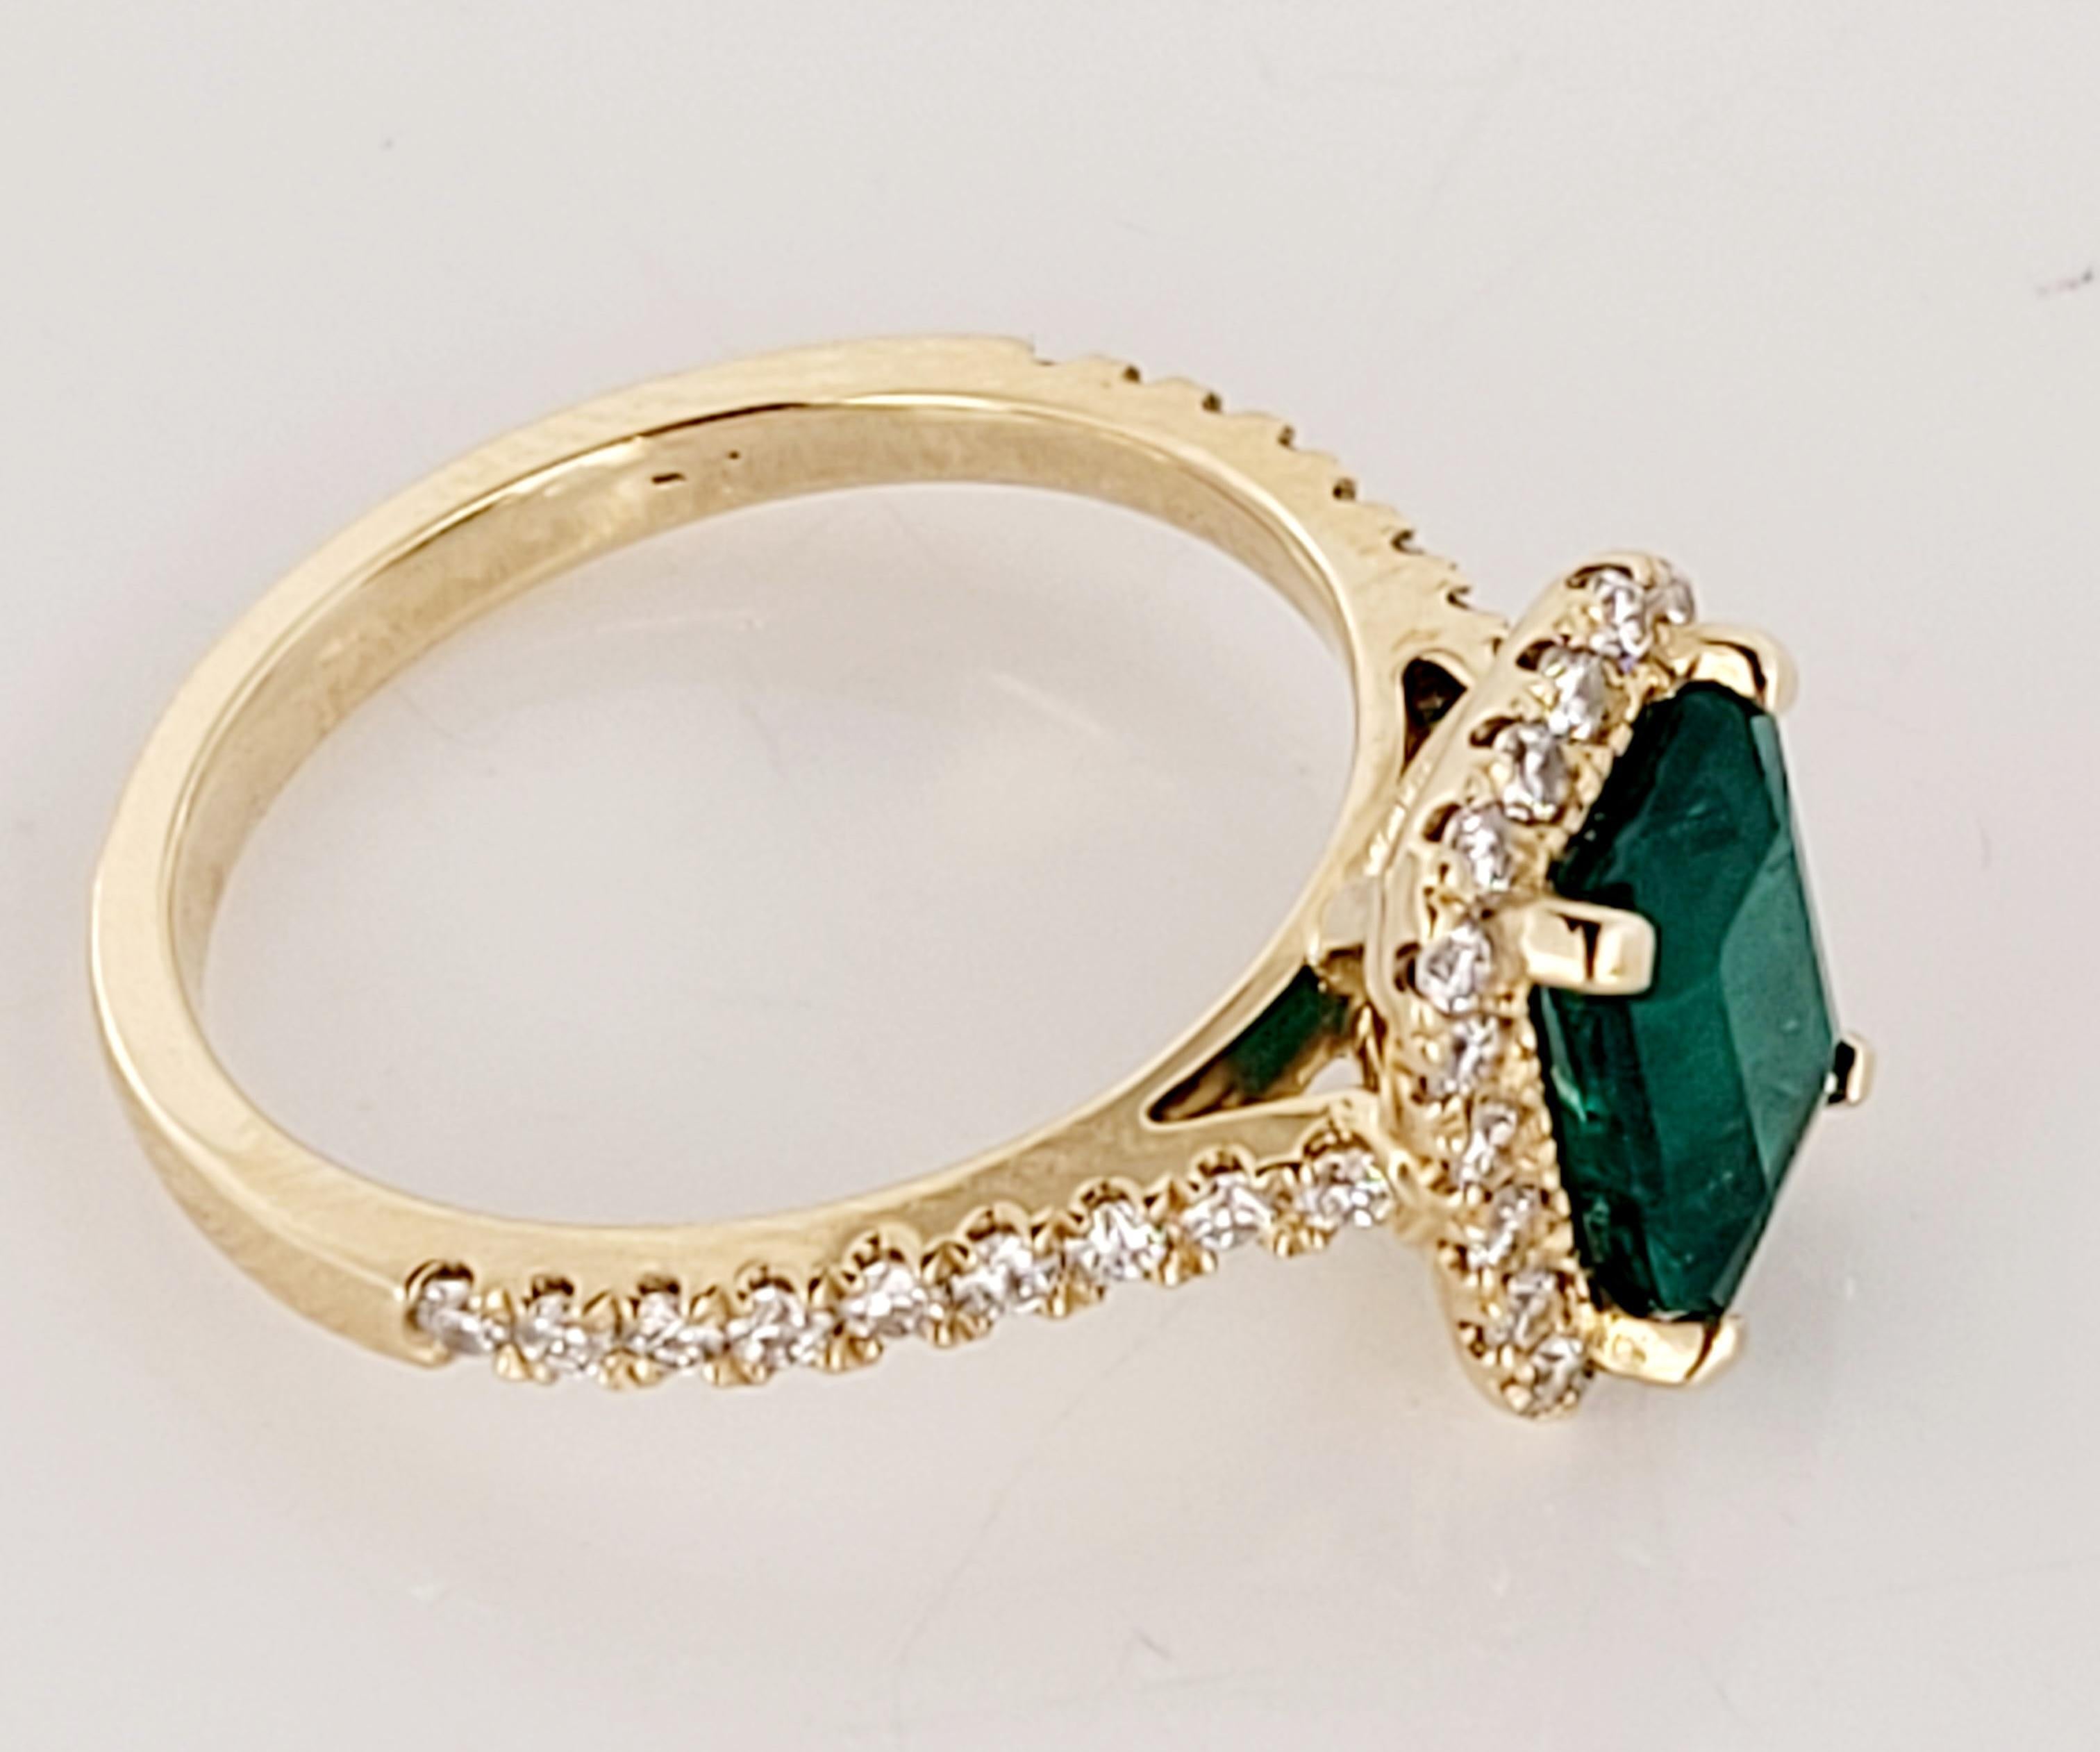 Emerald Cut Emerald Ring with White Diamond and 14K Yellow Gold en vente 2